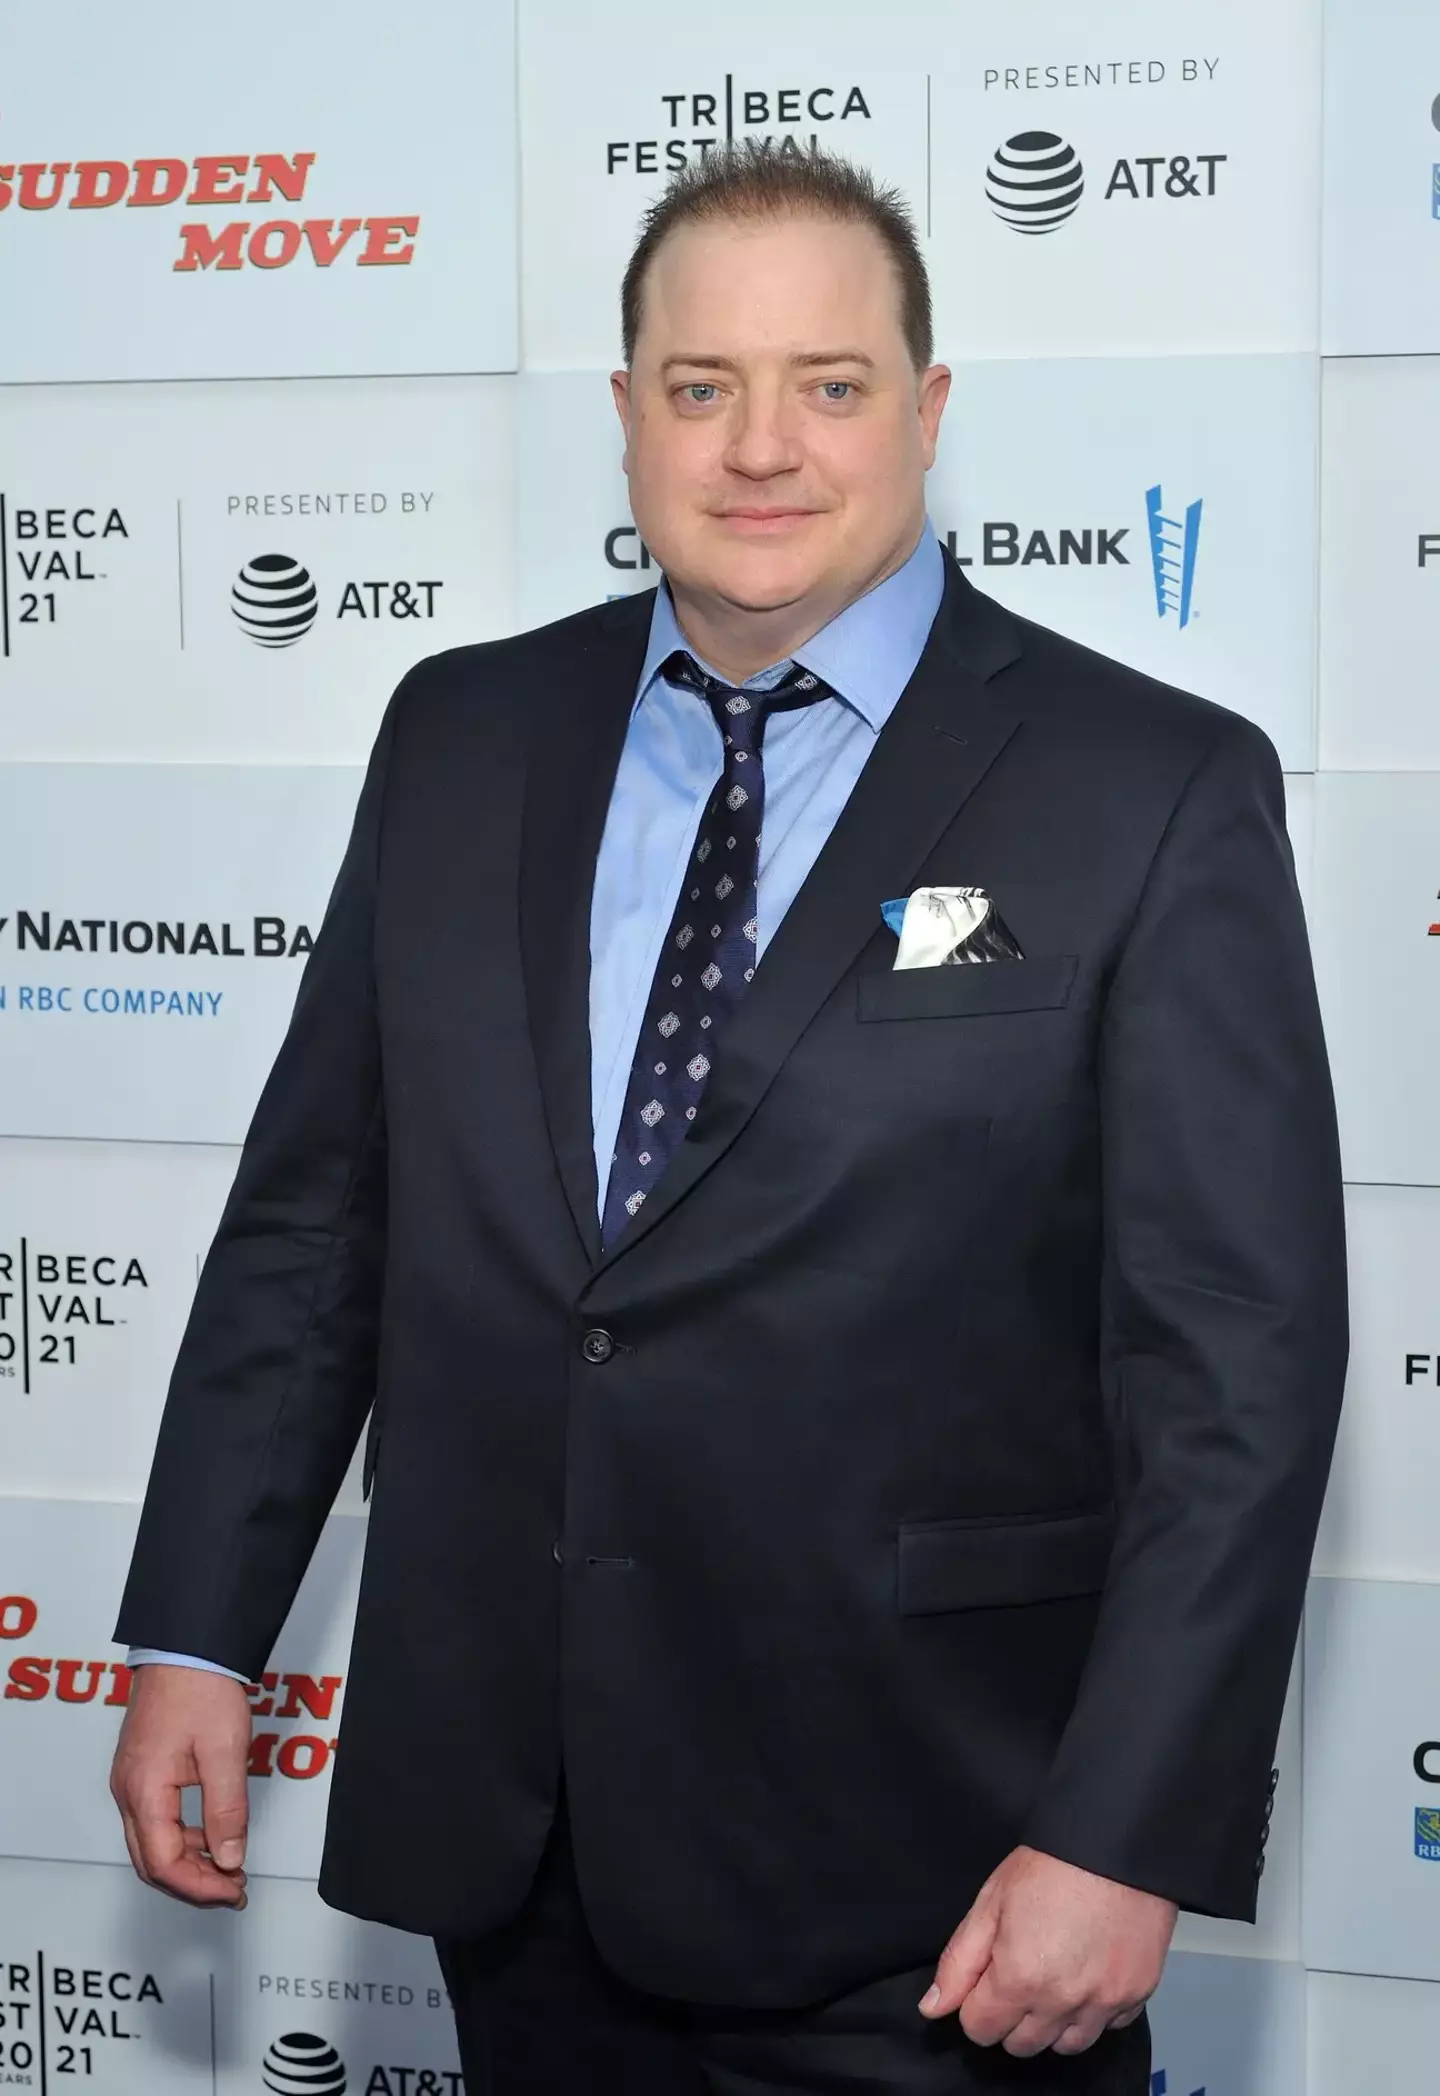 Brendan Fraser appeared to slip away from the limelight after success in movies like The Mummy and George of The Jungle.